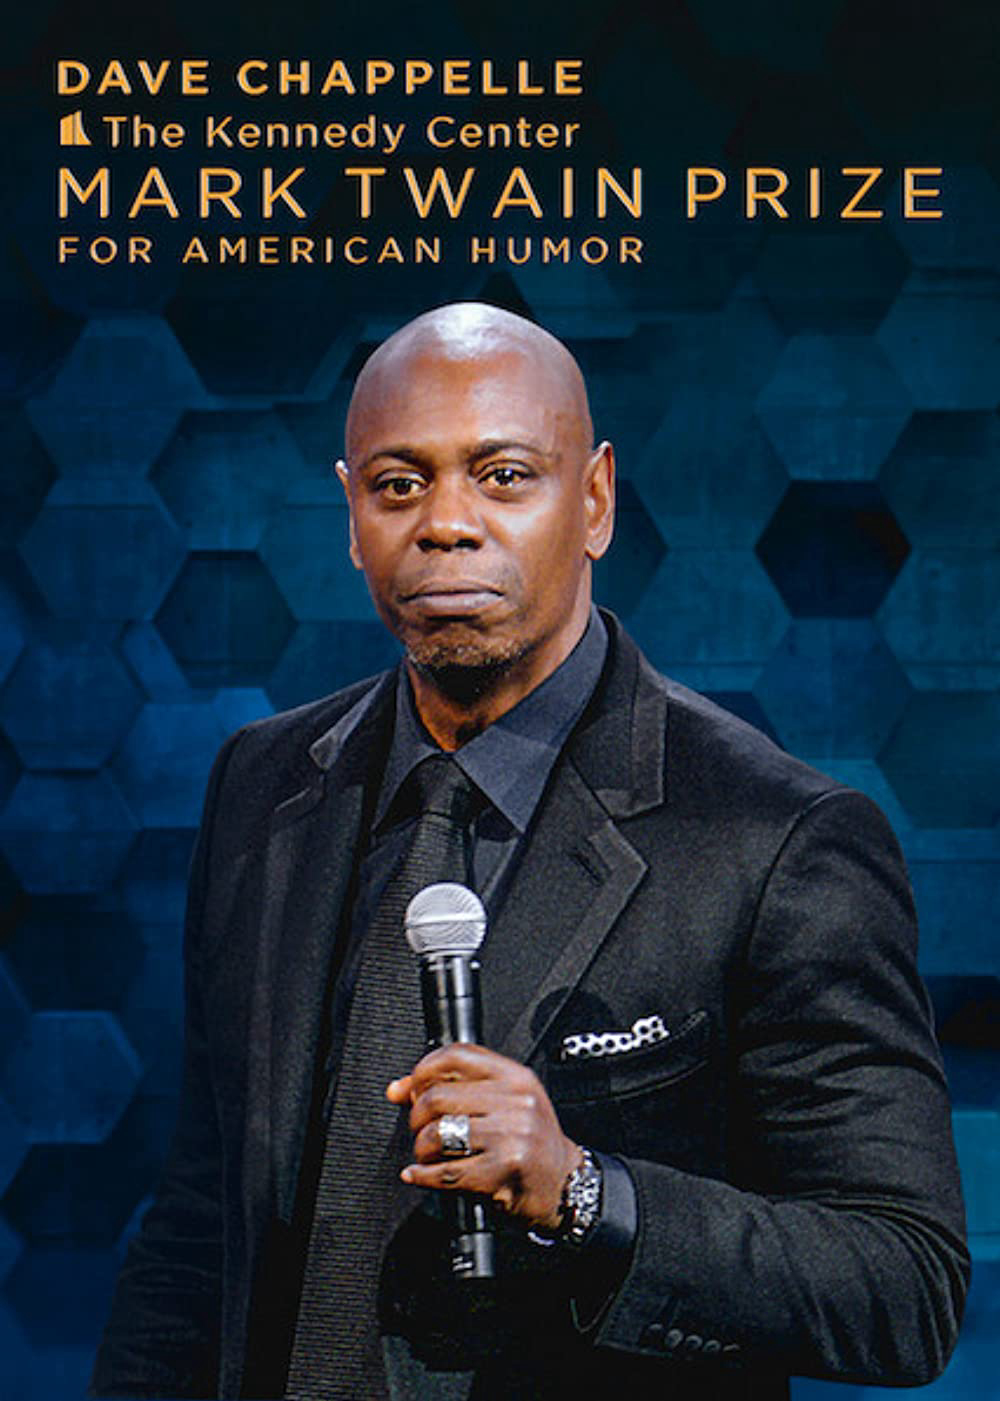 Xem Phim Dave Chappelle: Giải thưởng Mark Twain về hài kịch (Dave Chappelle: The Kennedy Center Mark Twain Prize for American Humor)